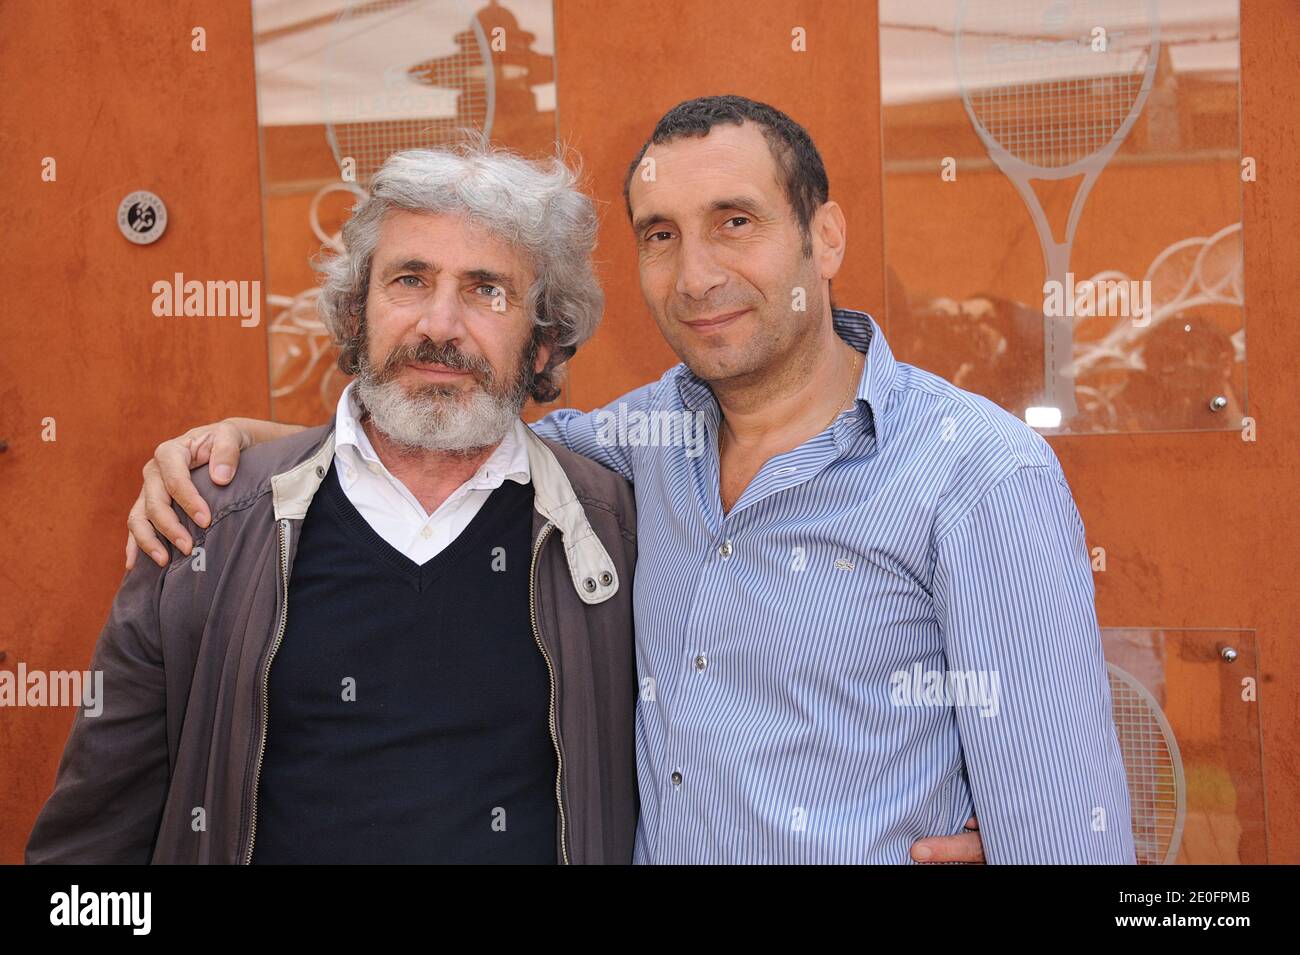 Michel Boujenah and Zinedine Soualem attending the French Tennis Open 2012  at Roland Garros arena in Paris, France on May 31, 2012. Photo by Giancarlo  Gorassini/ABACAPRESS.COM Stock Photo - Alamy